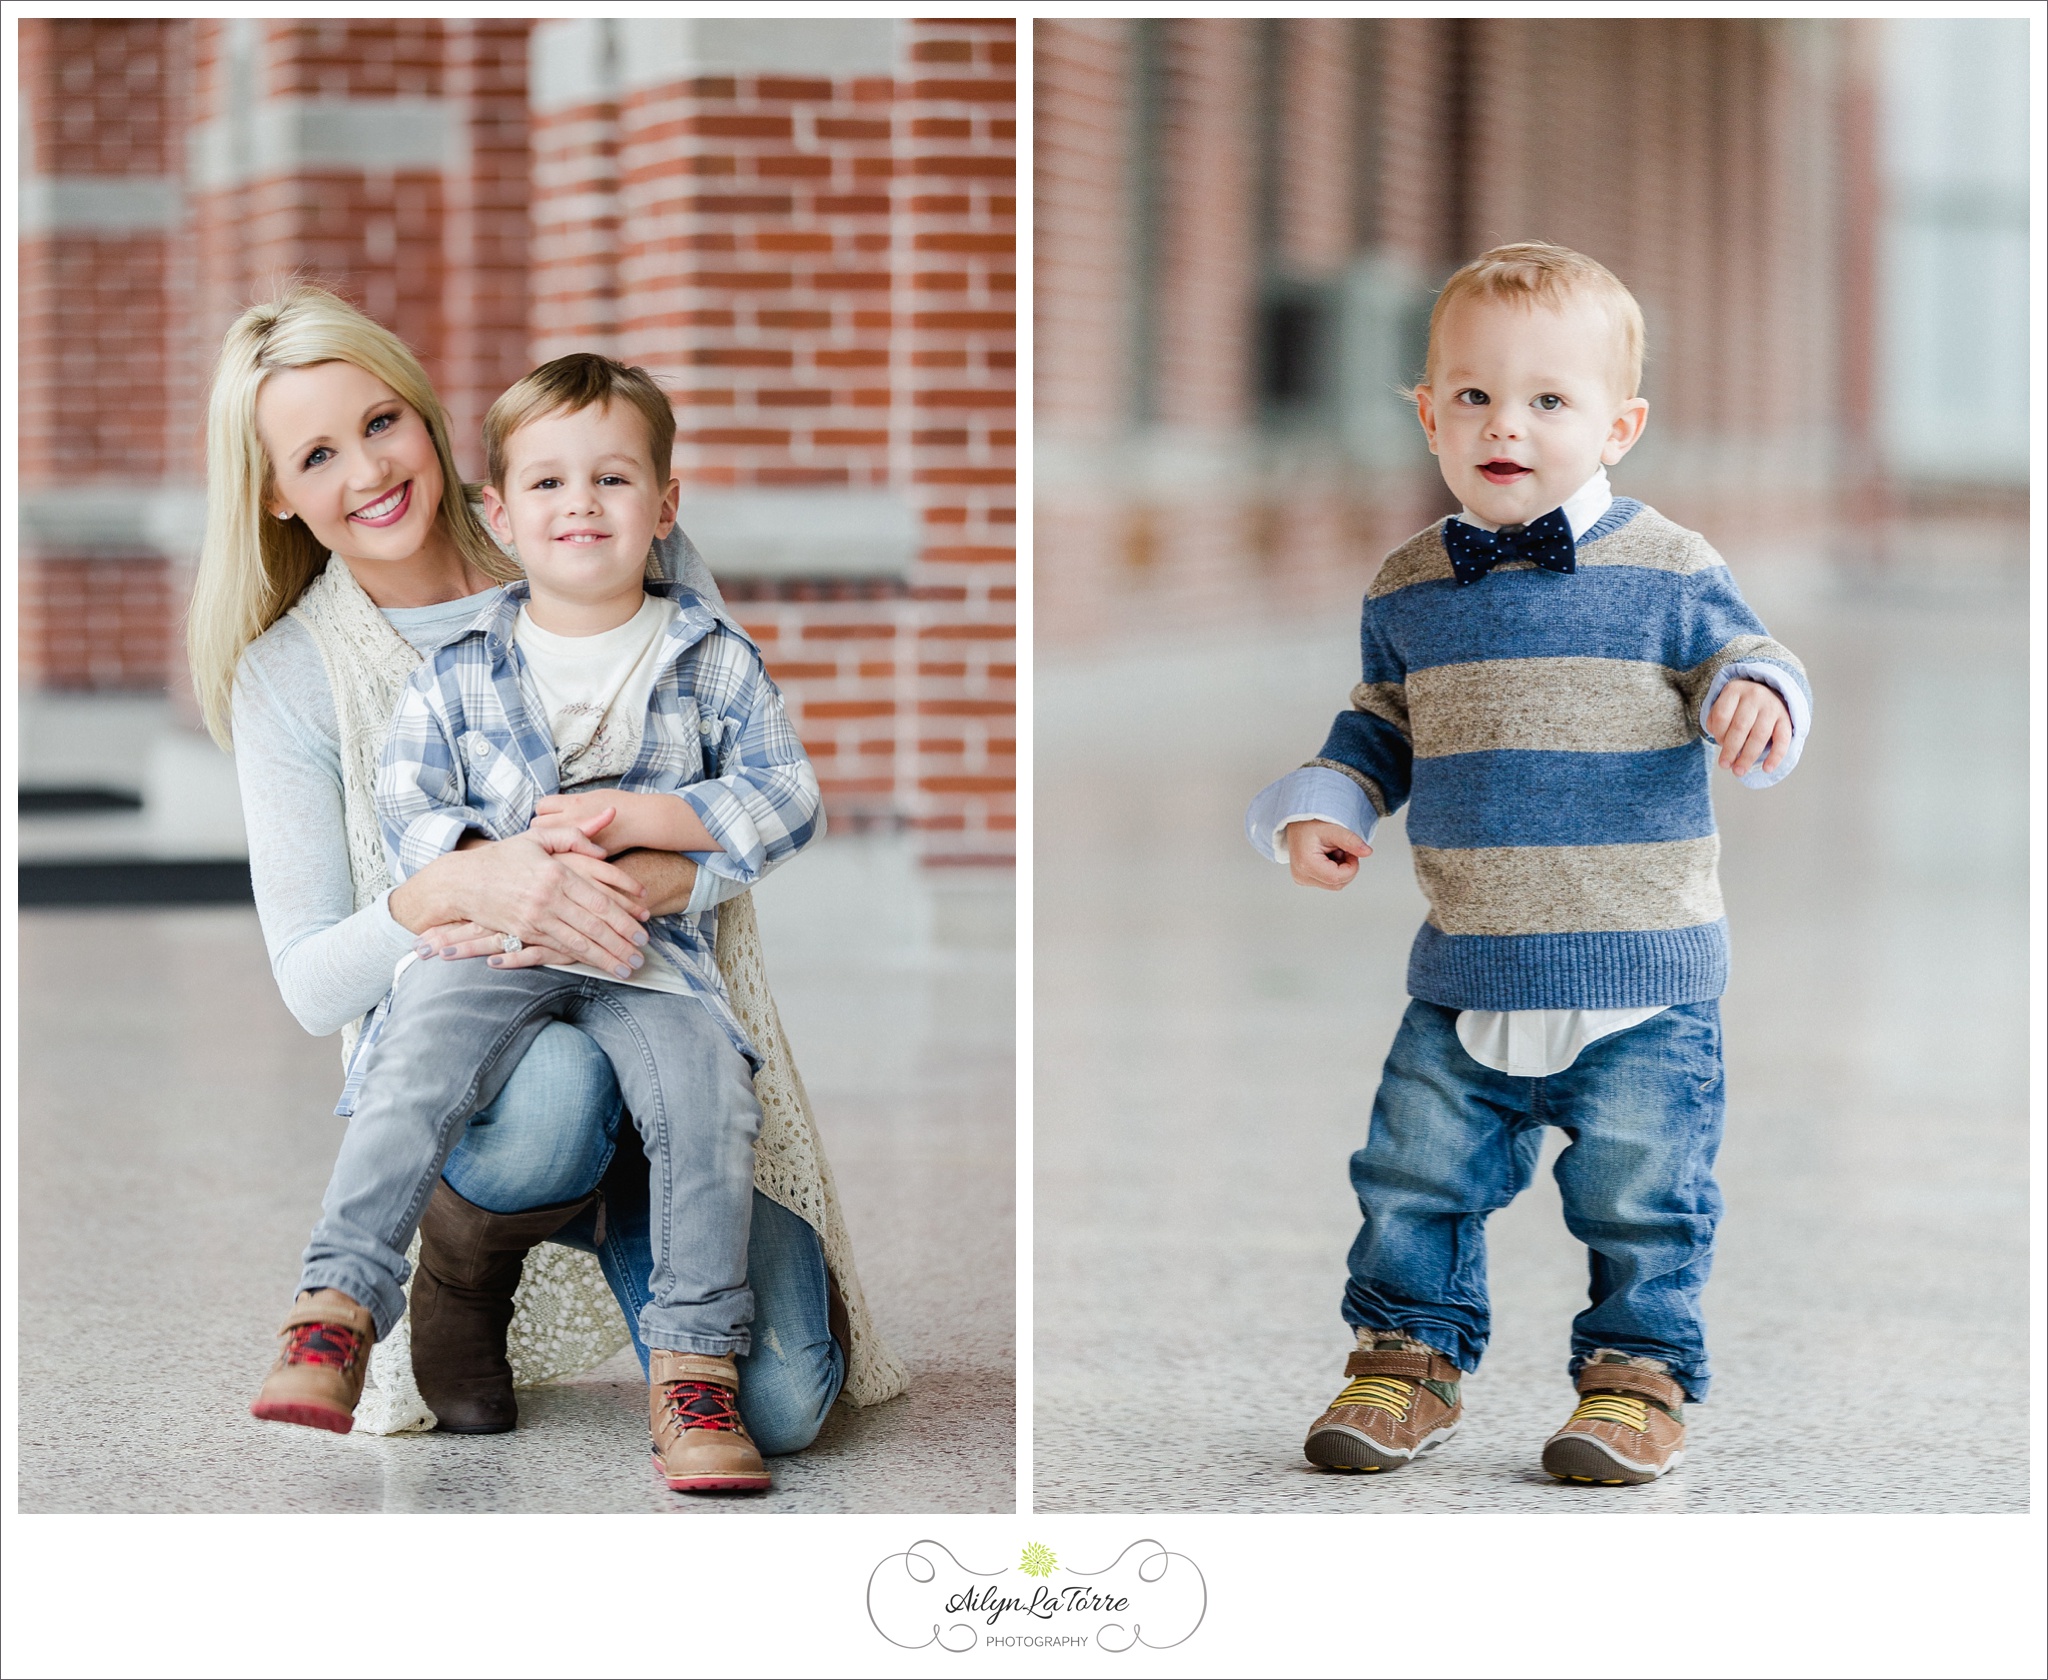 South Tampa Family Photographer | © Ailyn La Torre 2014